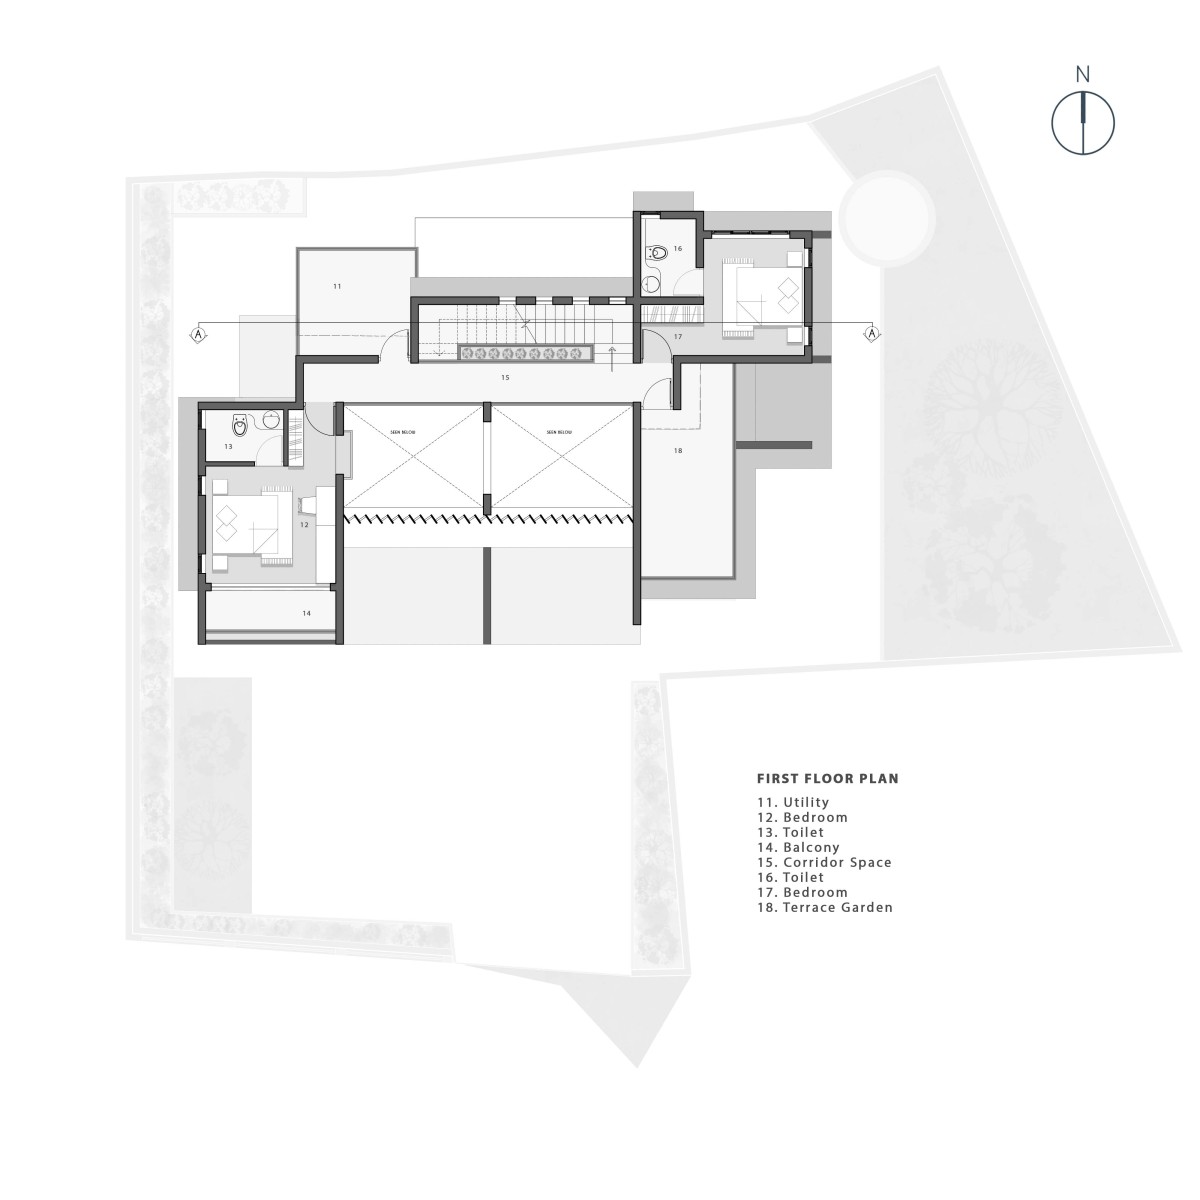 First Floor plan of Meghamalhar by T Square Architects